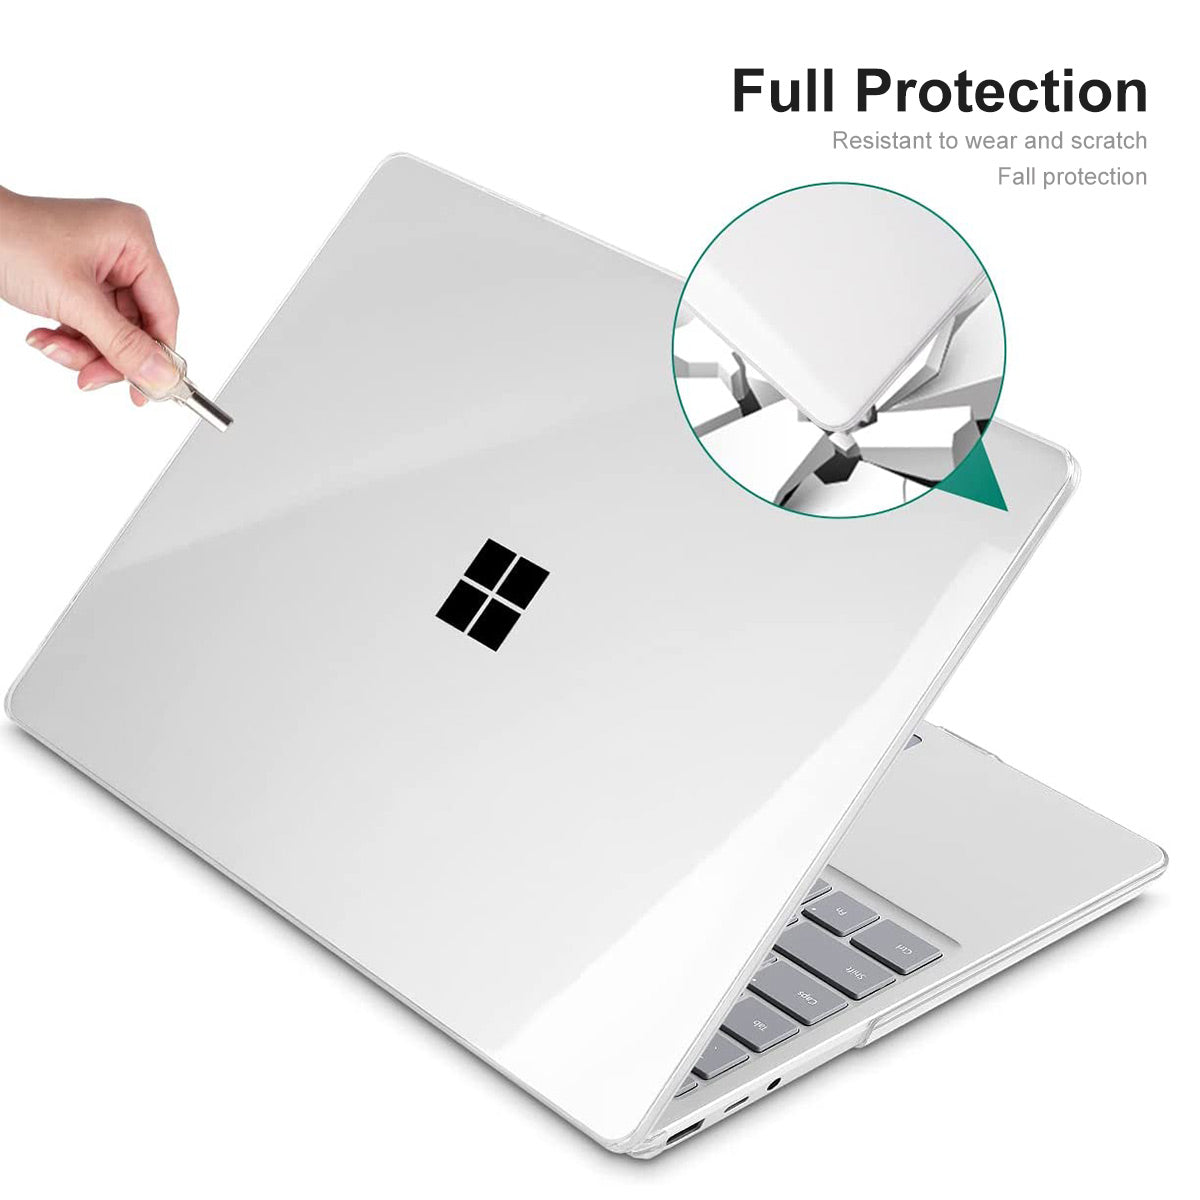 Laptop Case for Microsoft Surface Laptop Go 1 / 2 12.4 inch (1943 / 2013) Notebook Hard PC Anti-drop Cover - Black